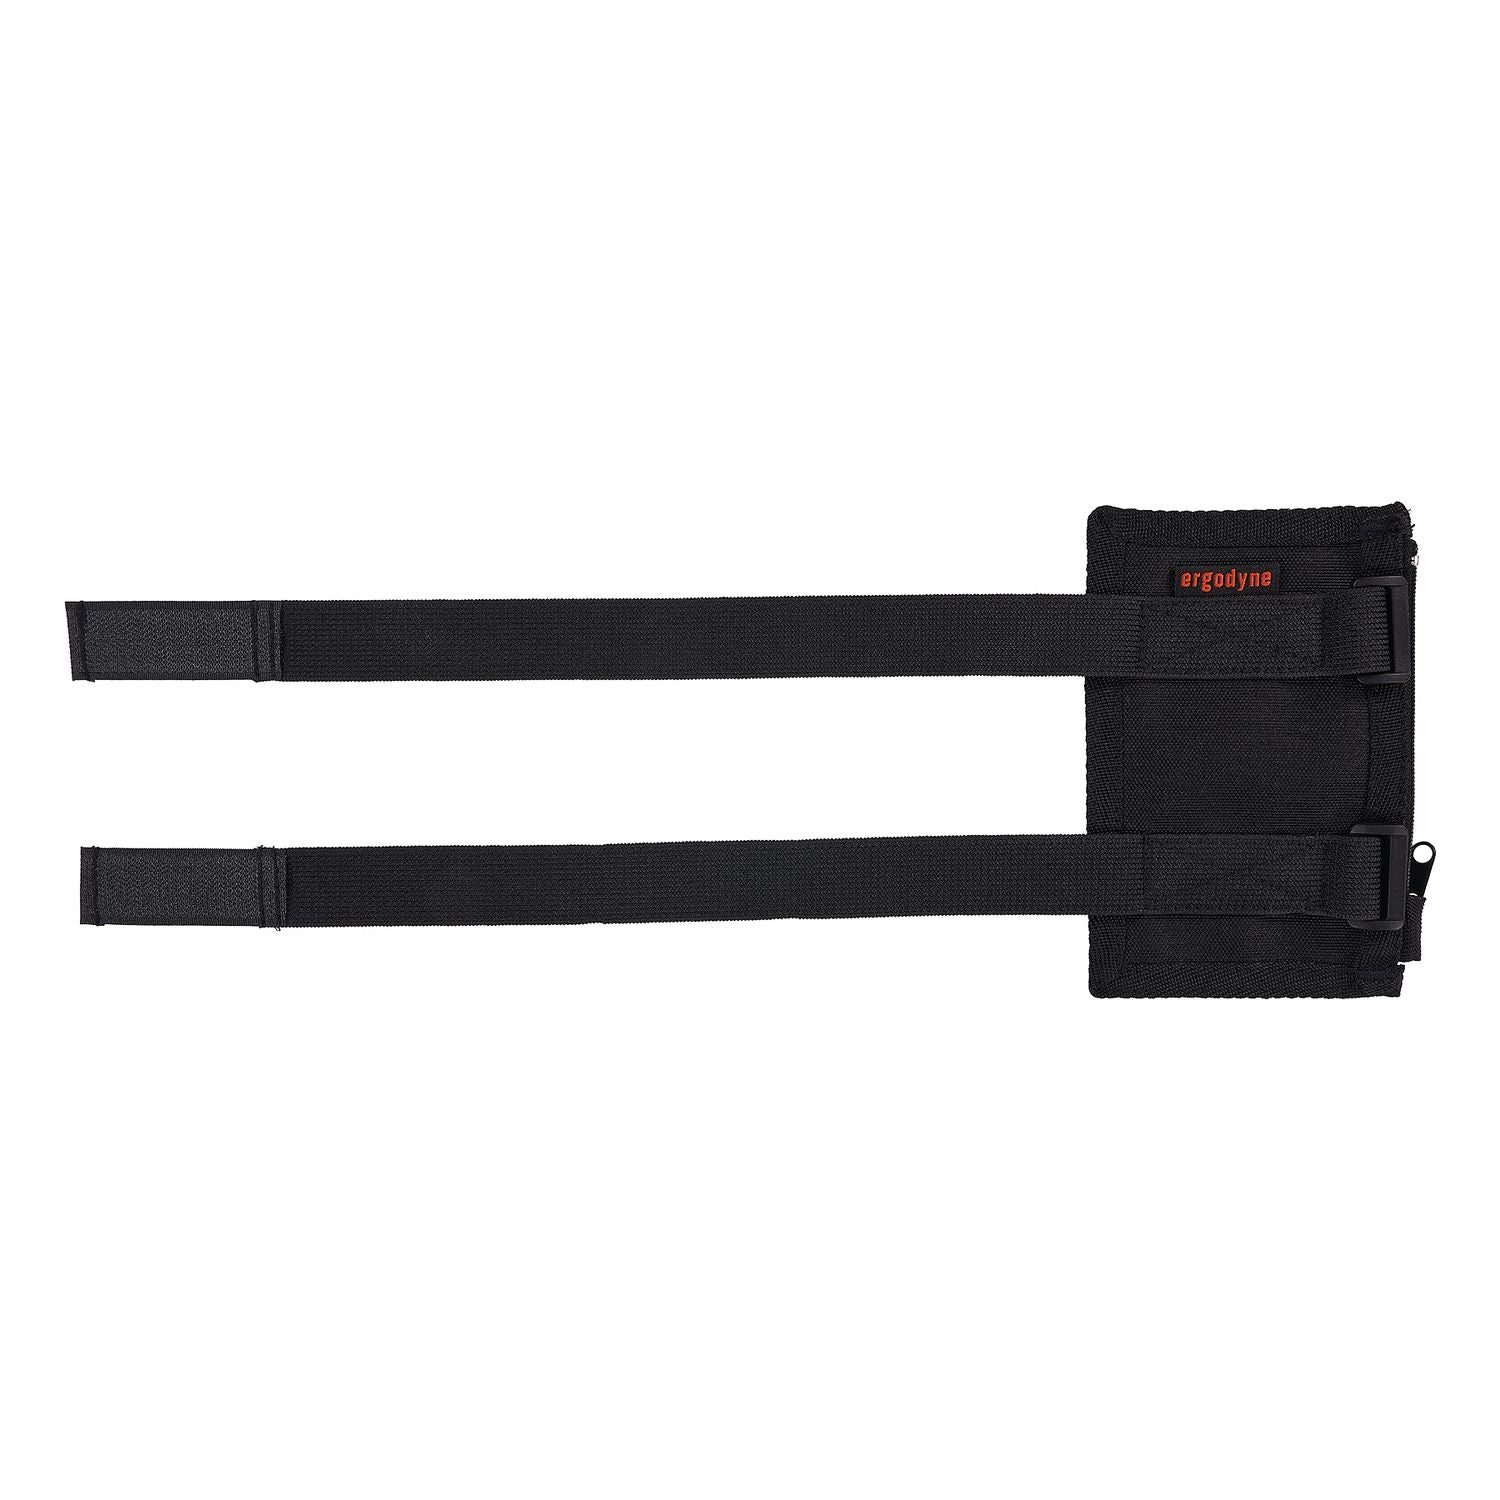 squids-3387-dual-band-arm-id-badge-holder-w-zipper-vertical-black-375-x-575-for-275-x-475-insert-ships-in-1-3-bus-days_ego19959 - 4